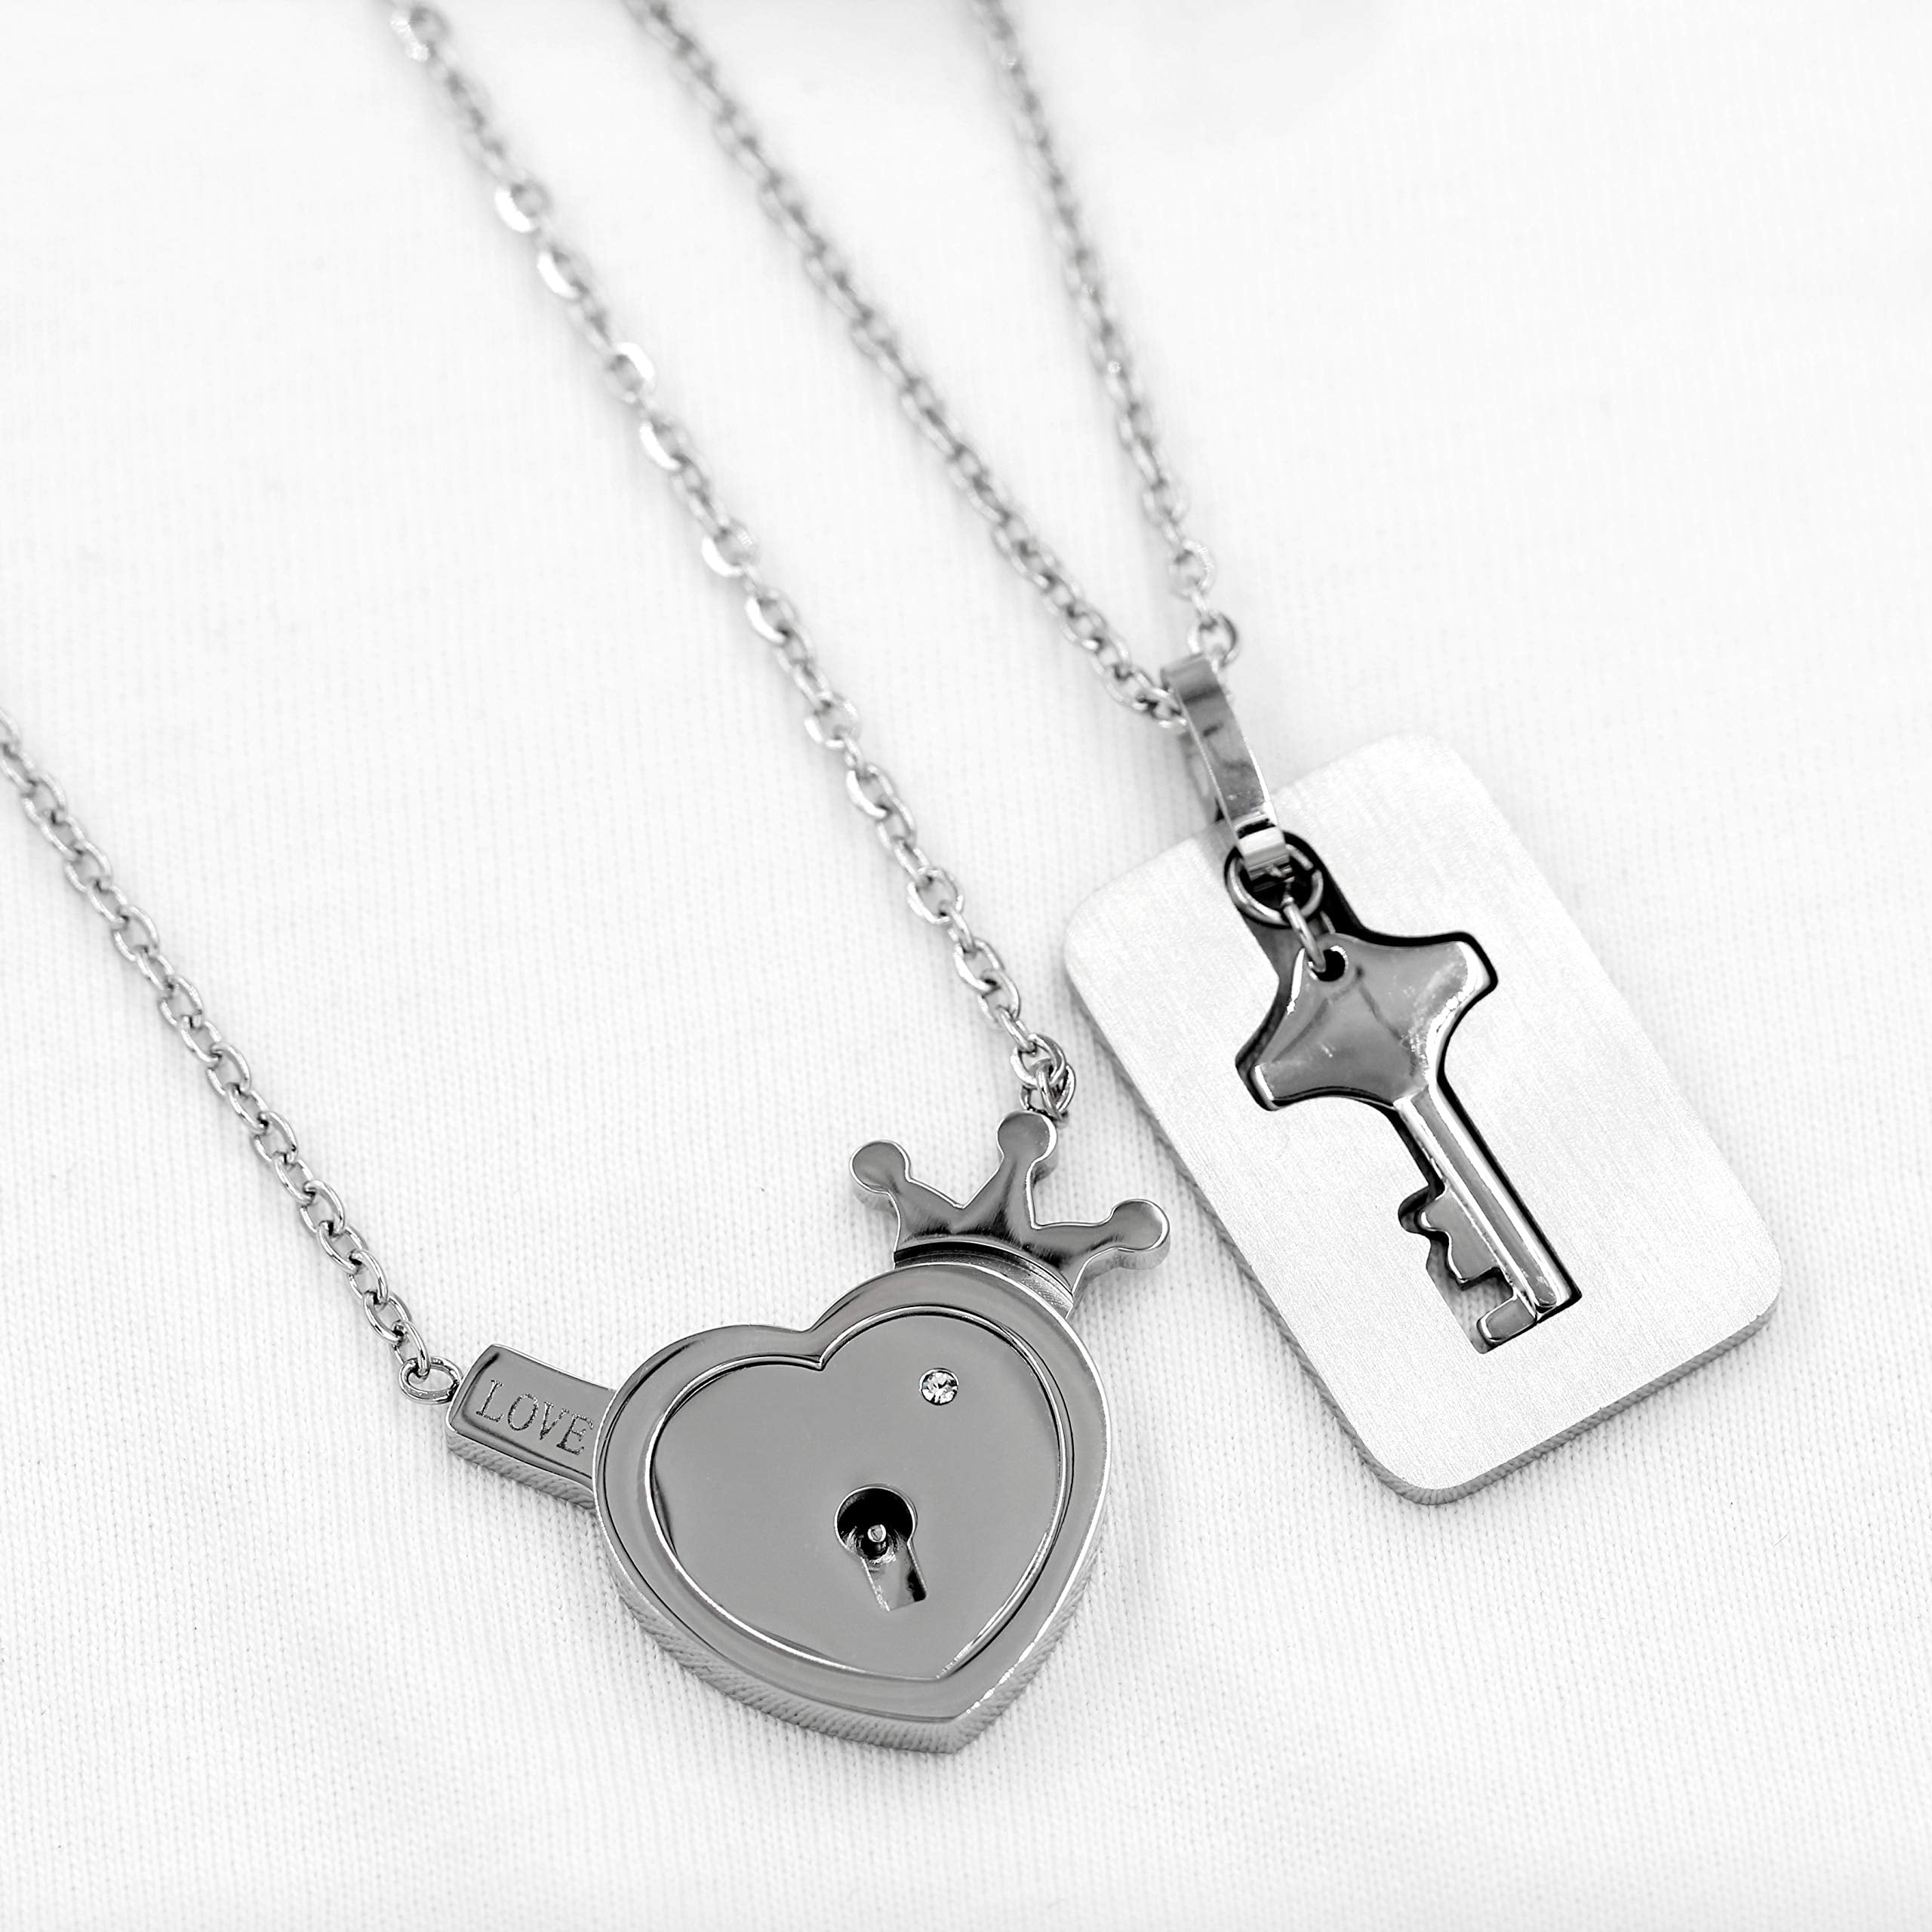 Uloveido 100 Languages I Love You Projection Necklace Love Heart Crown Lock and Shield Key Pendant for Couples Boyfriend Girlfriend Y1129 (Steel)